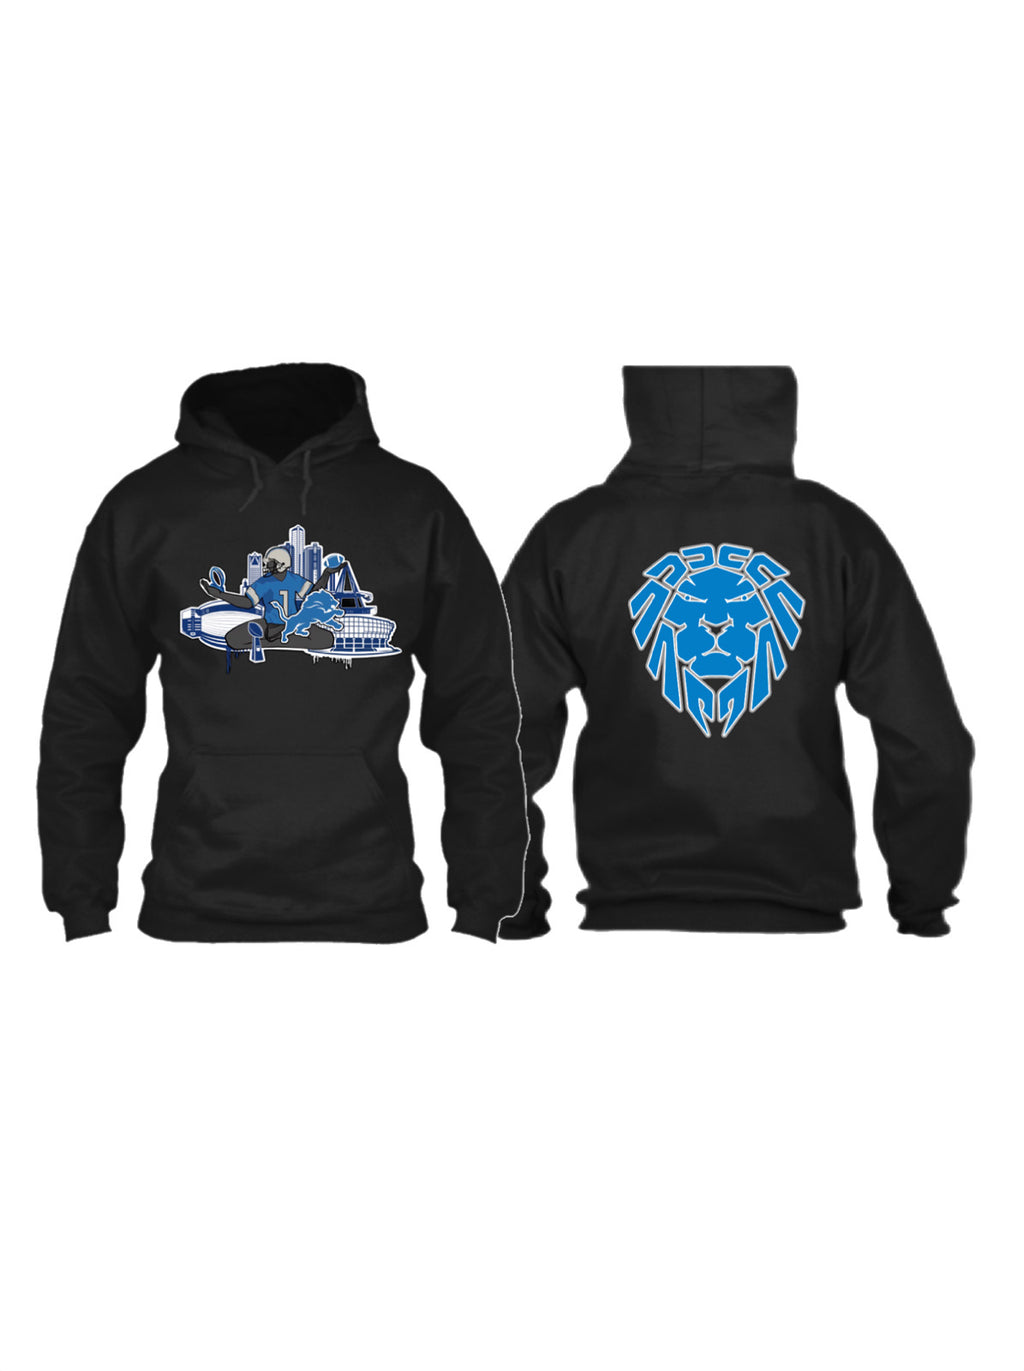 GO LIONS HOODIE limited edition